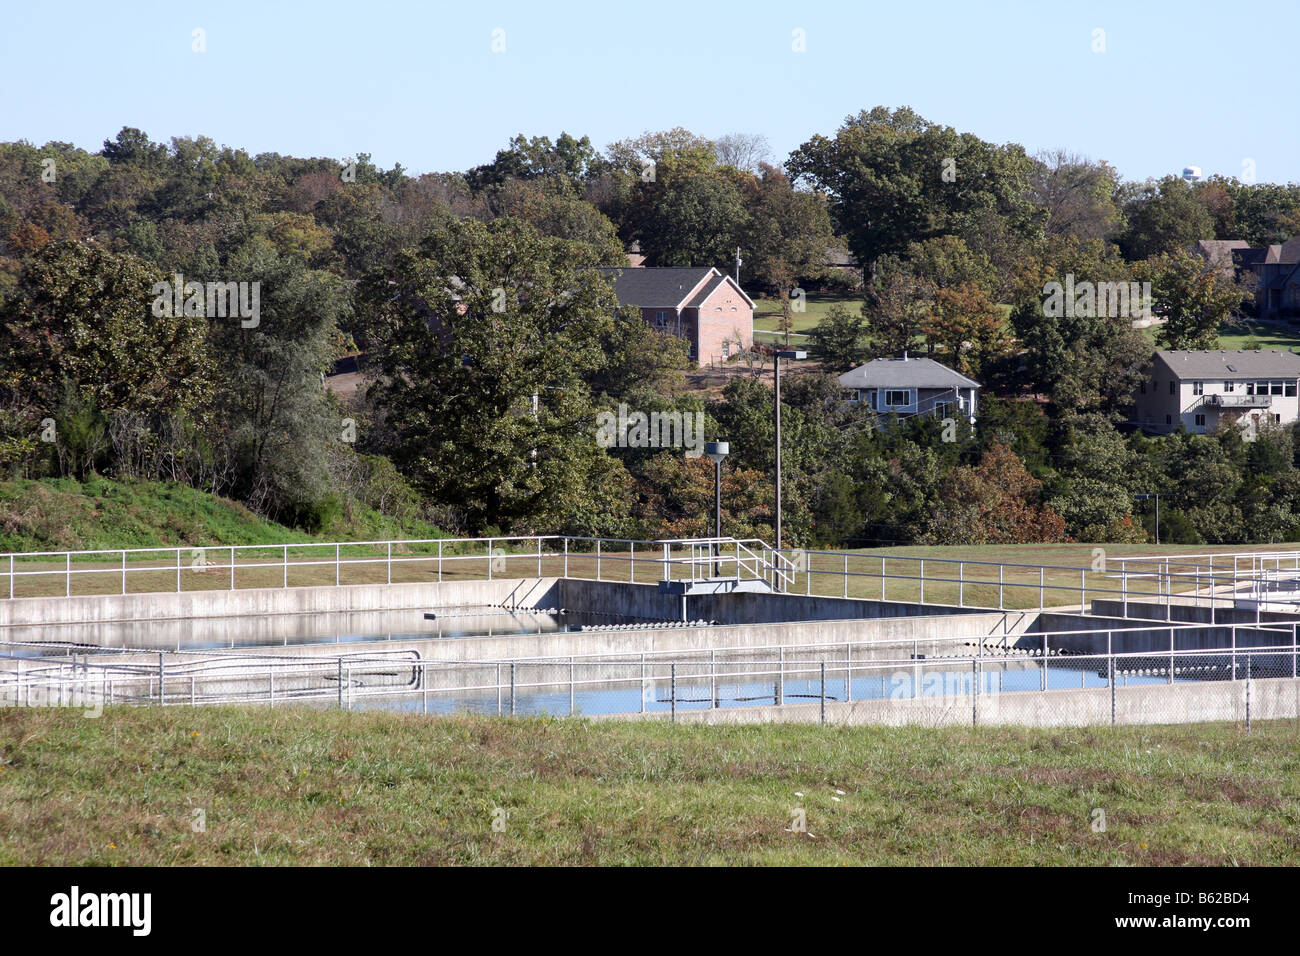 The city of Branson Missouri waste water management facility Stock Photo